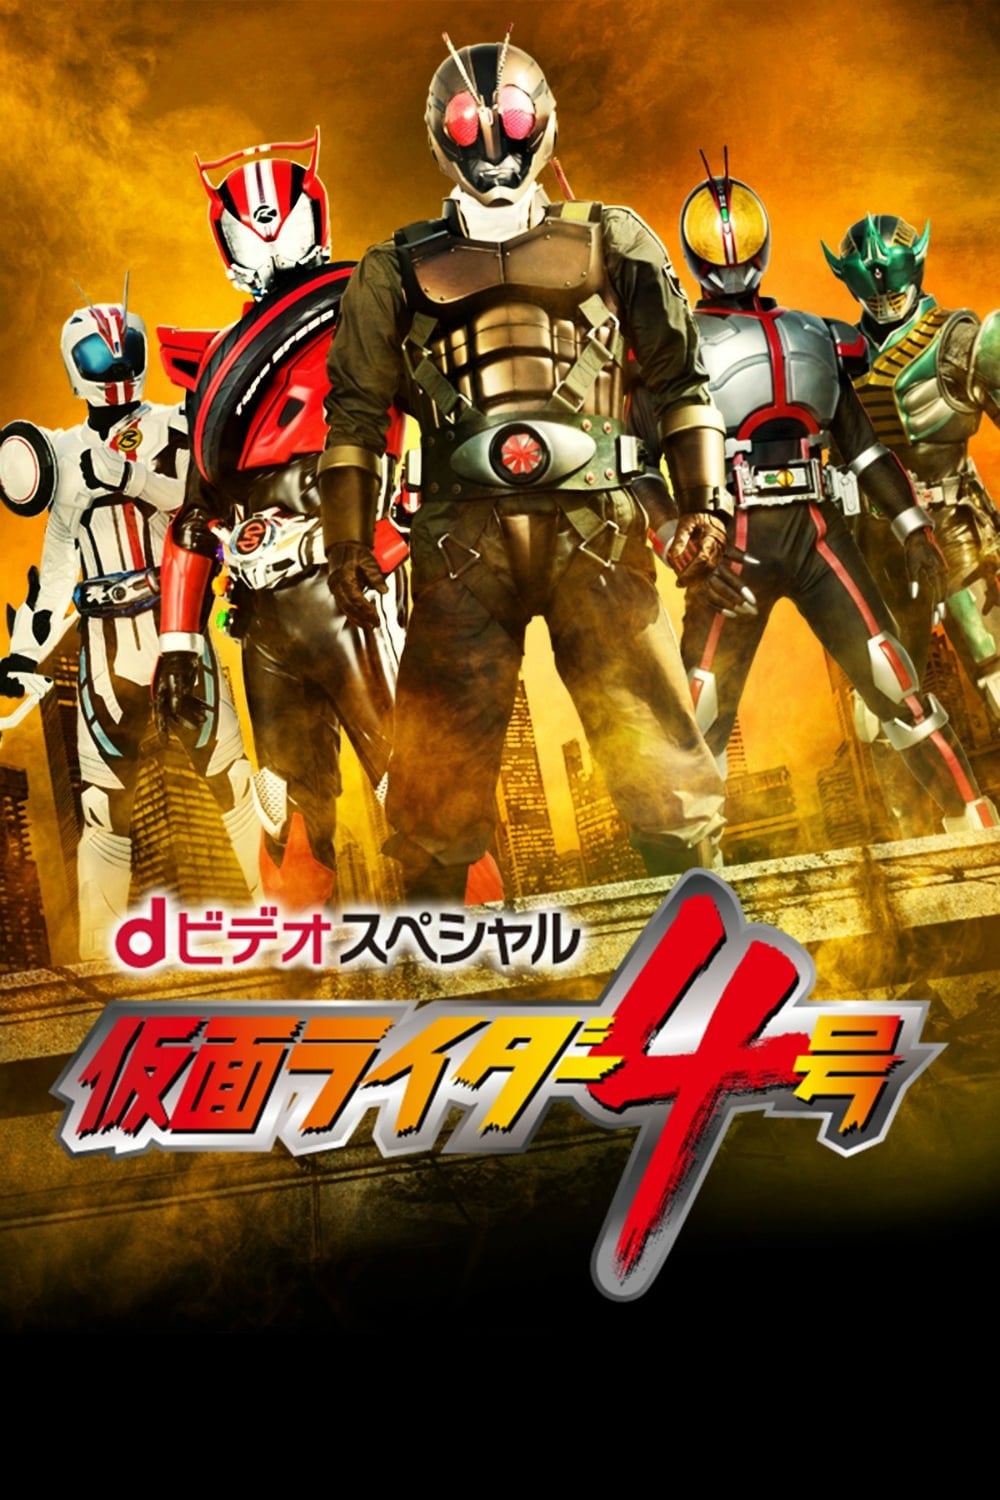 ｄビデオスペシャル　仮面ライダー4号 TV Shows About Loop